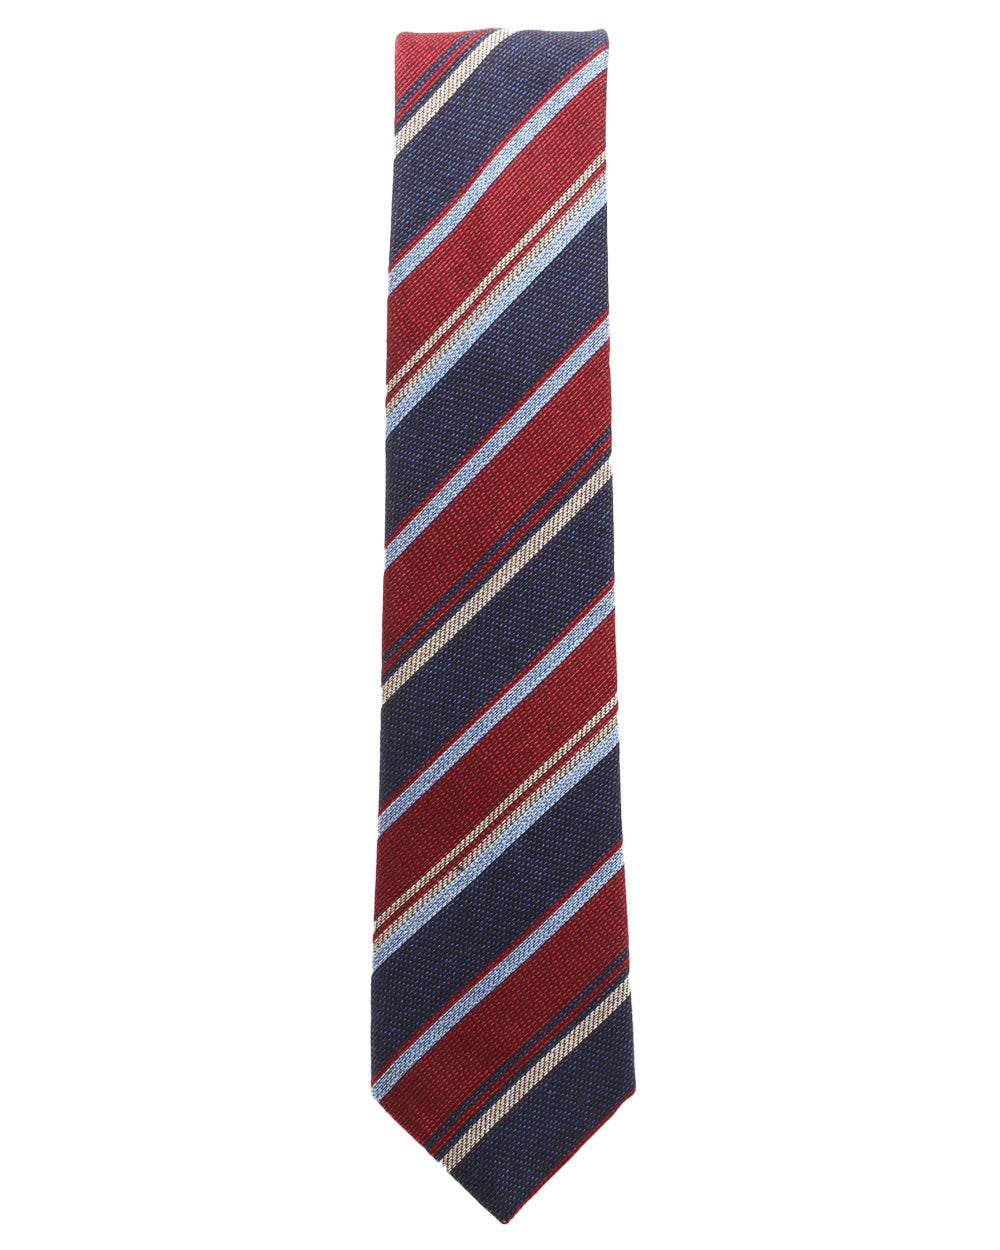 Burgundy and Navy Striped Silk and Cotton Tie